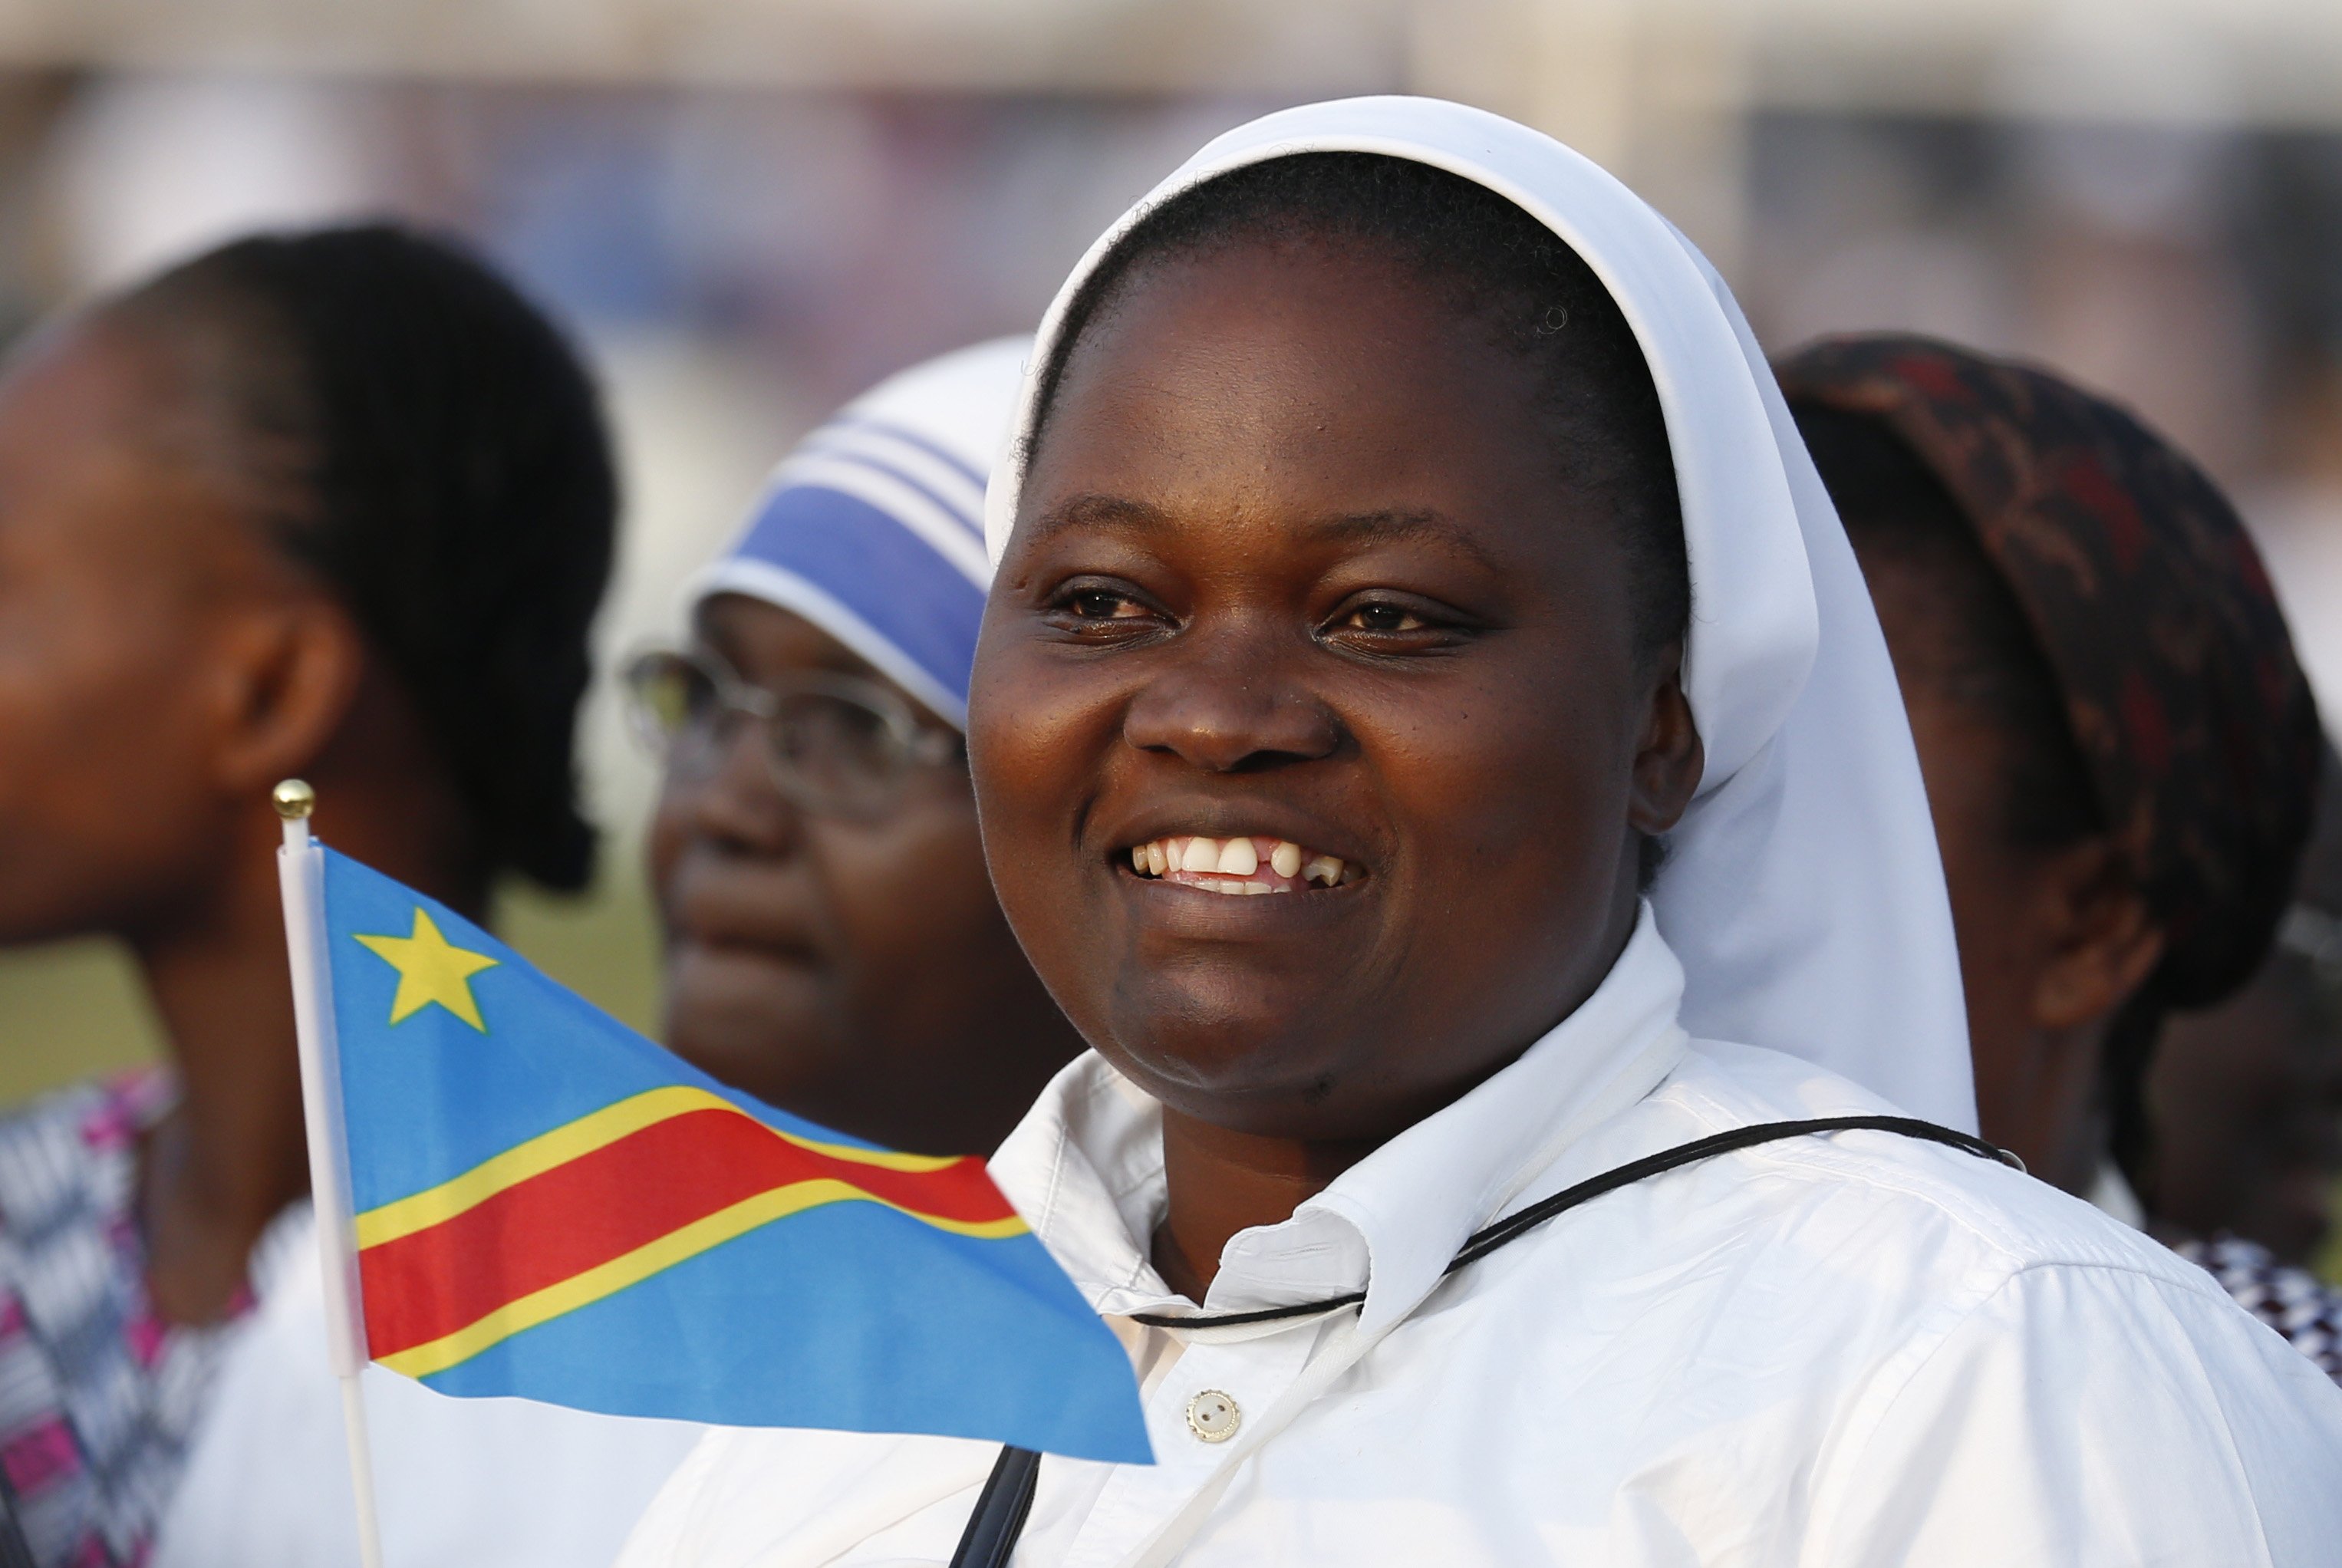 Pope Francis preaches peace to one million Congolese people at Zaire rite Mass | America Magazine